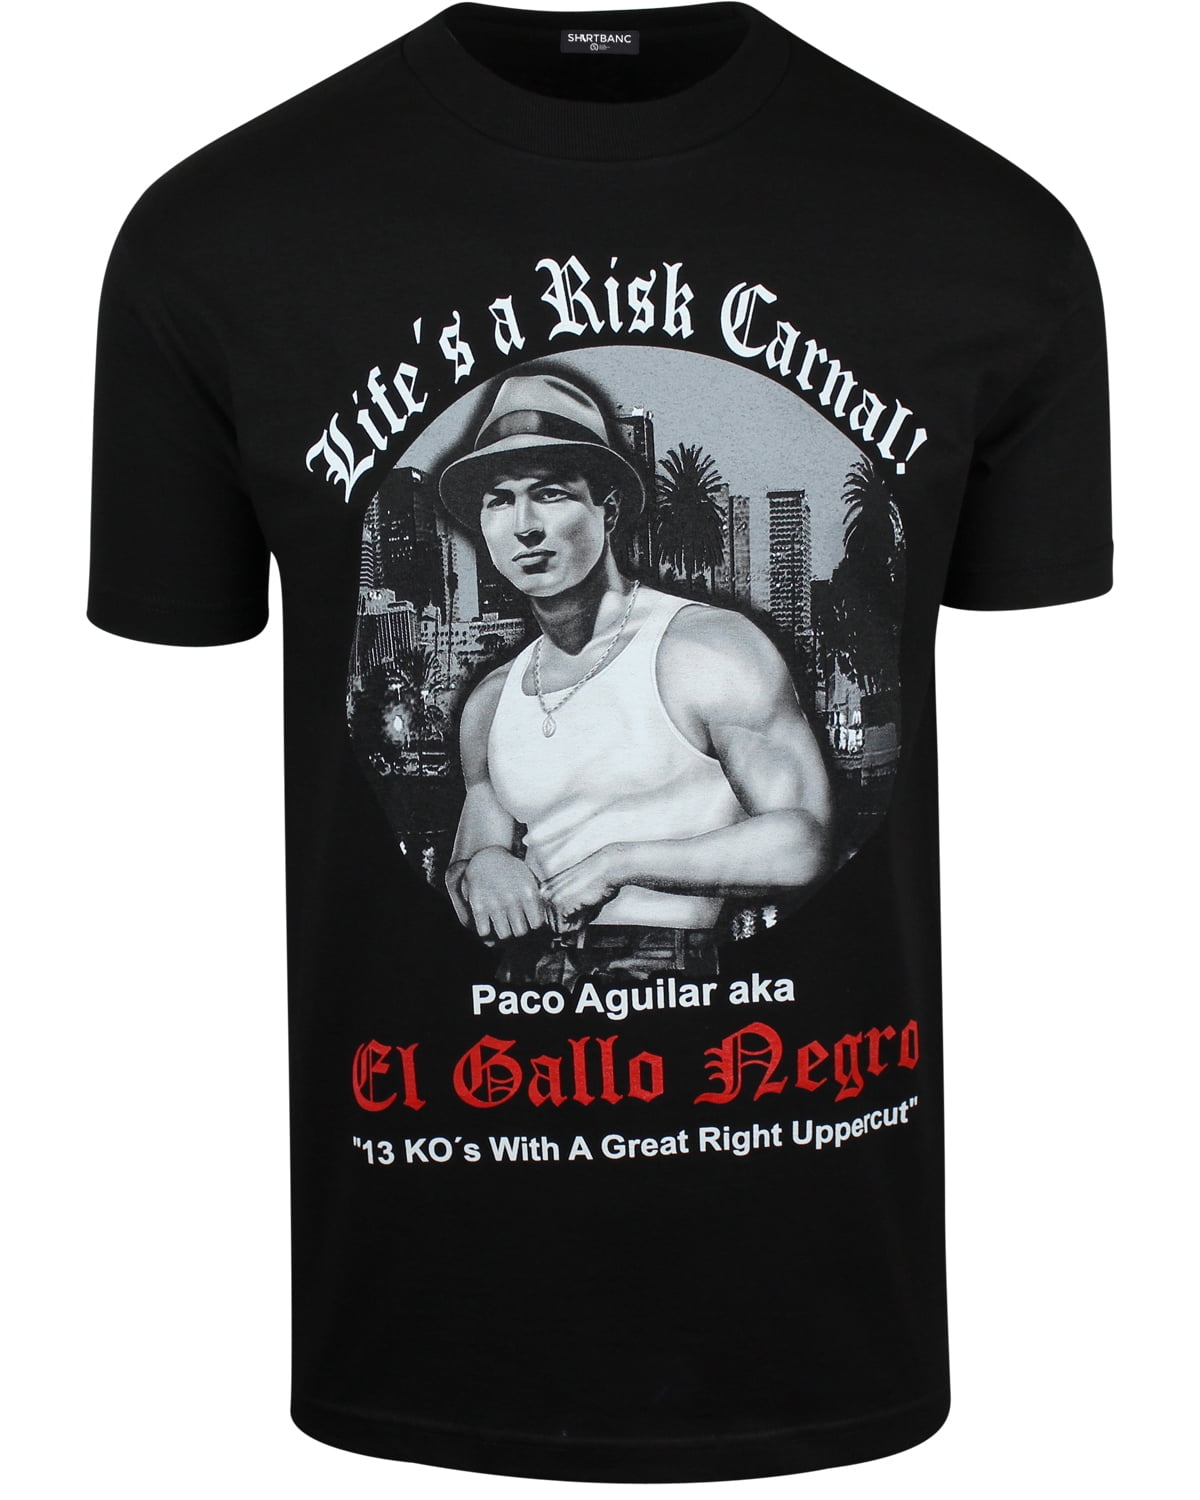 Life's a risk carnal gif